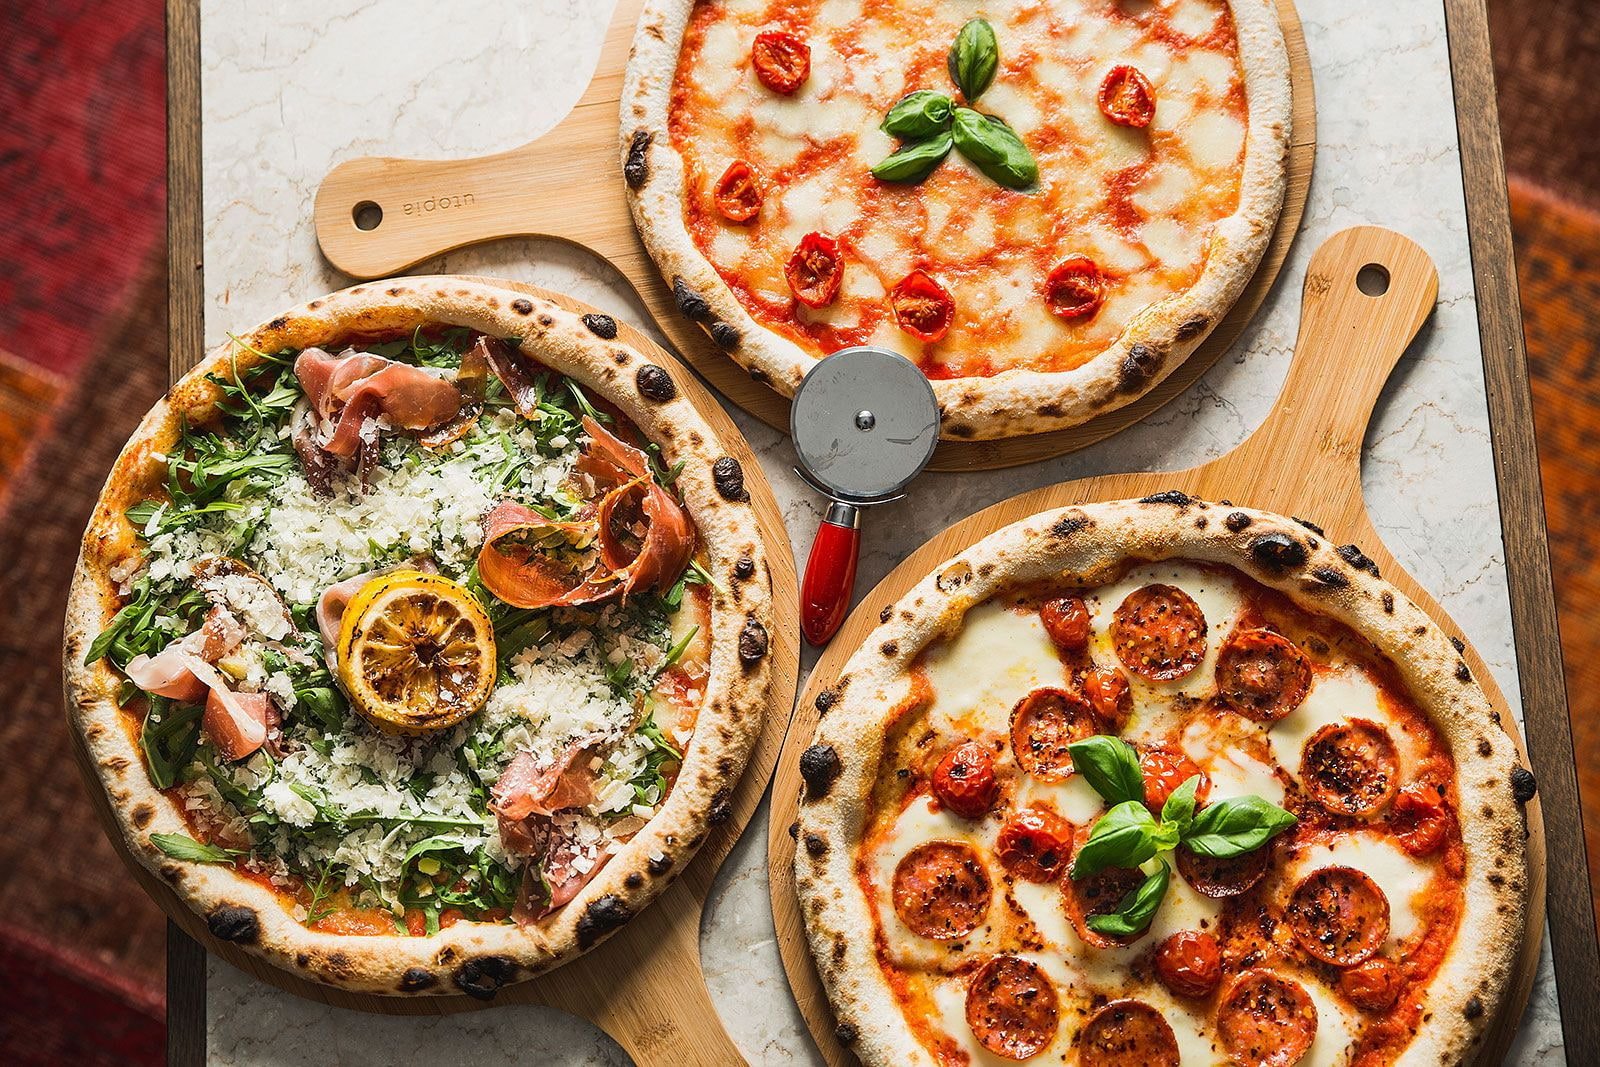 The best pizza places in London